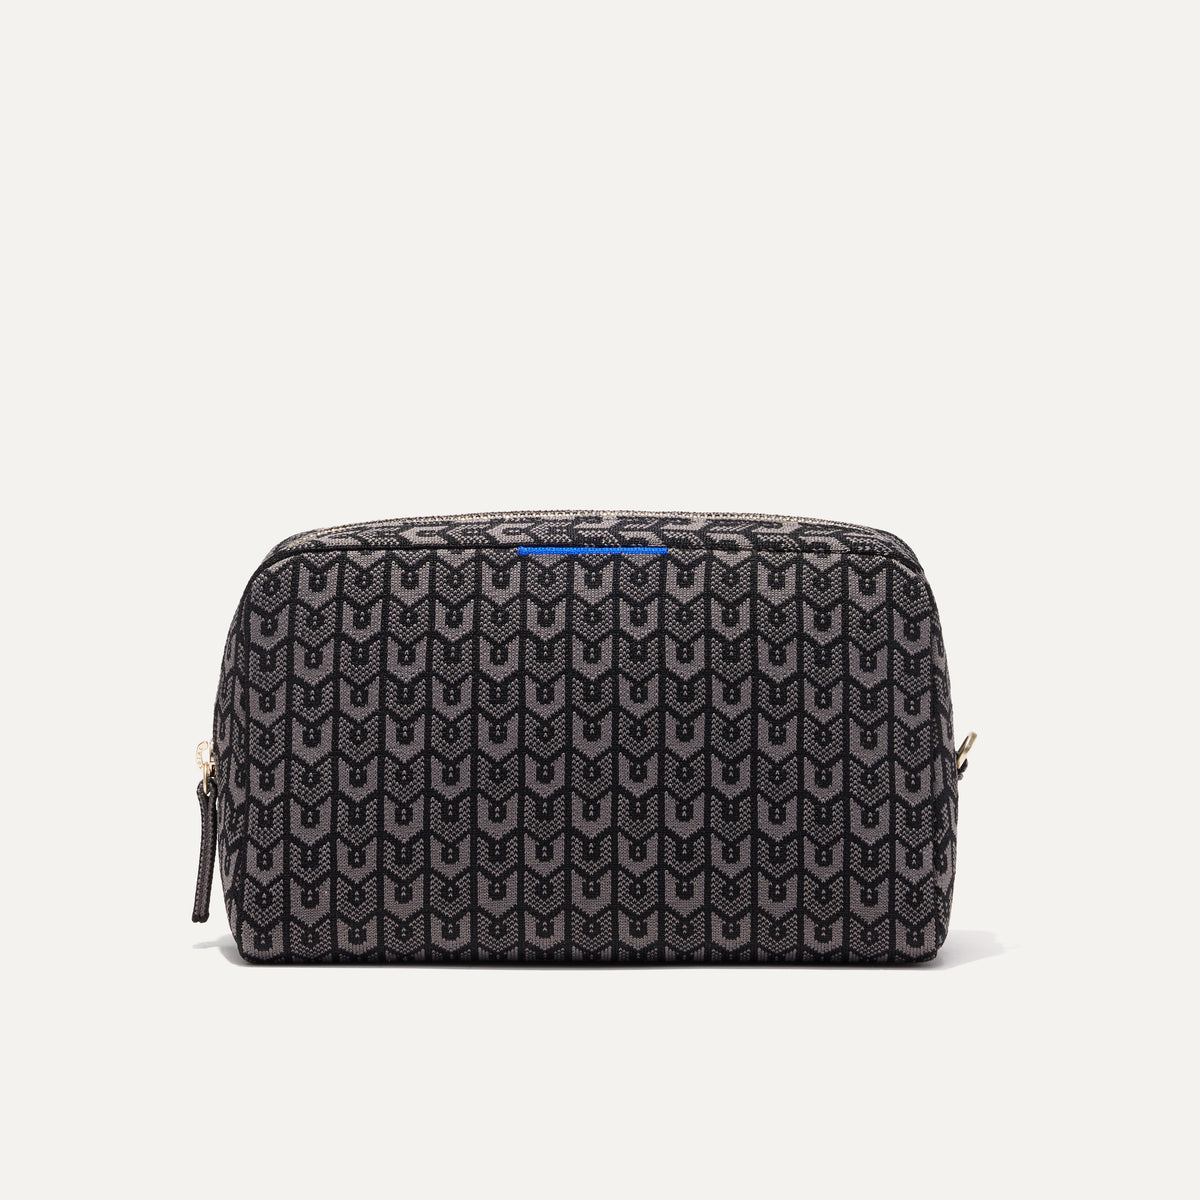 Louis Vuitton Cosmetic Pouch in Berry